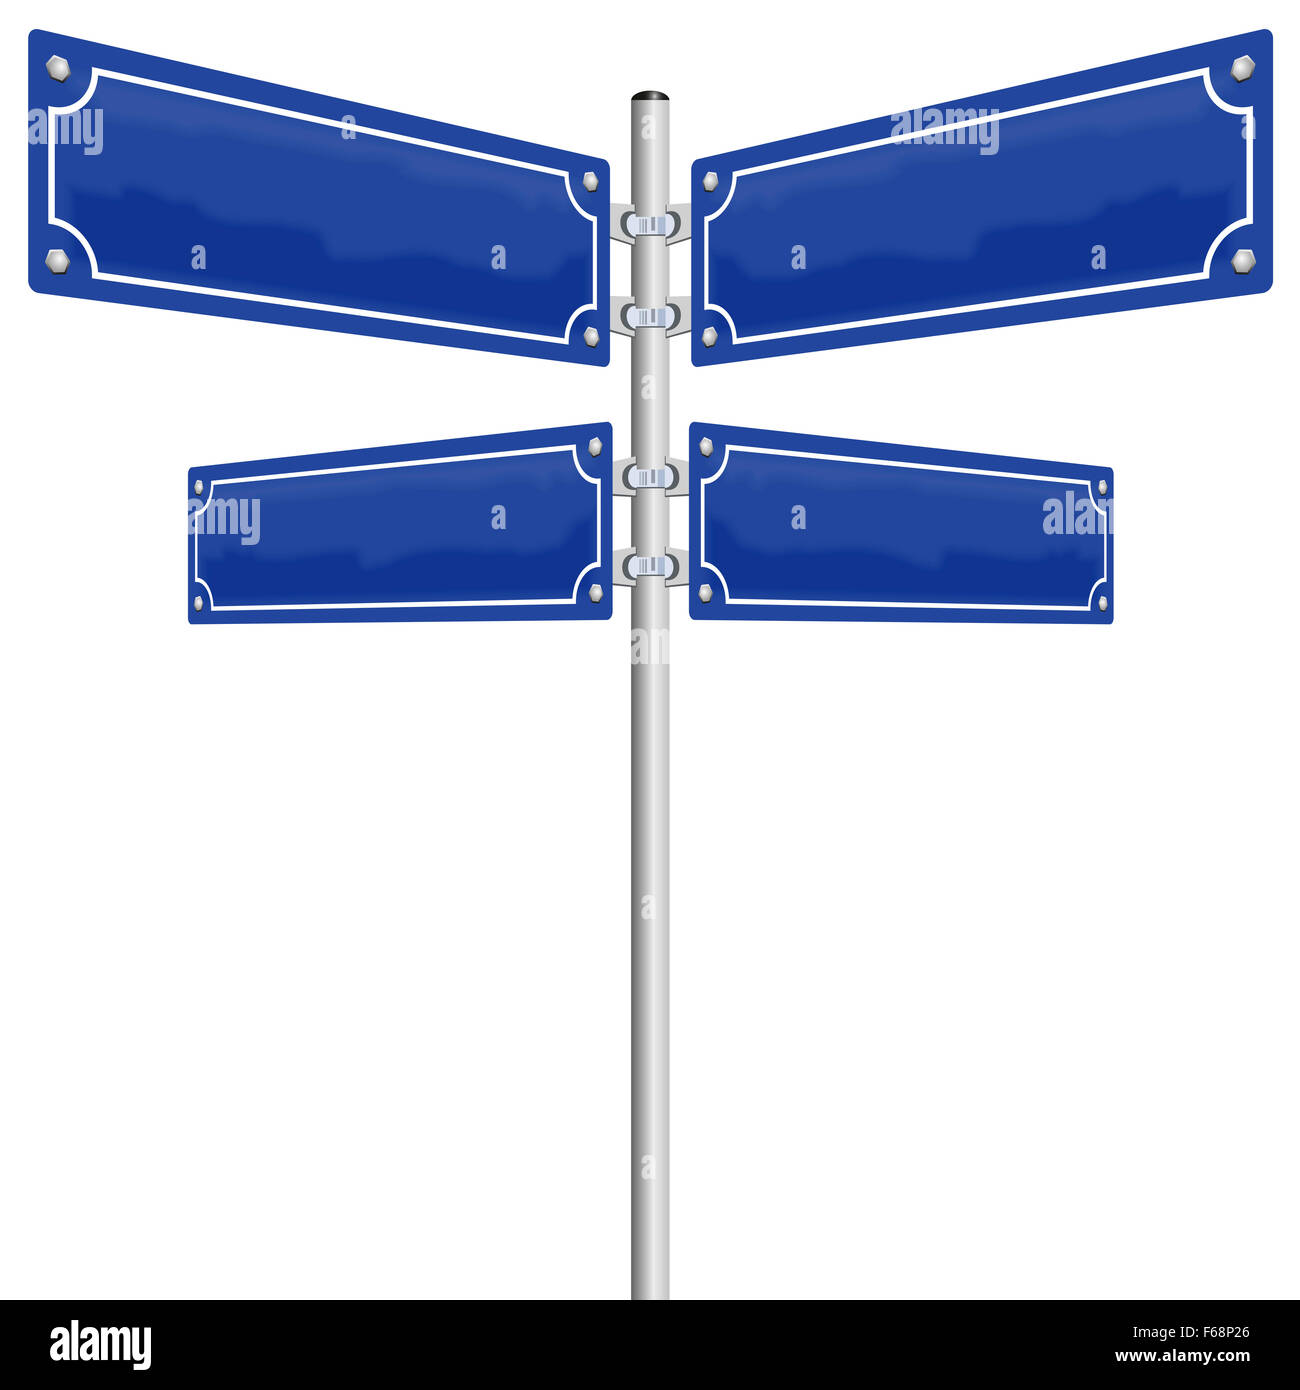 Street signs - four blank, glossy blue metal panels showing in four different directions. Illustration on white background. Stock Photo